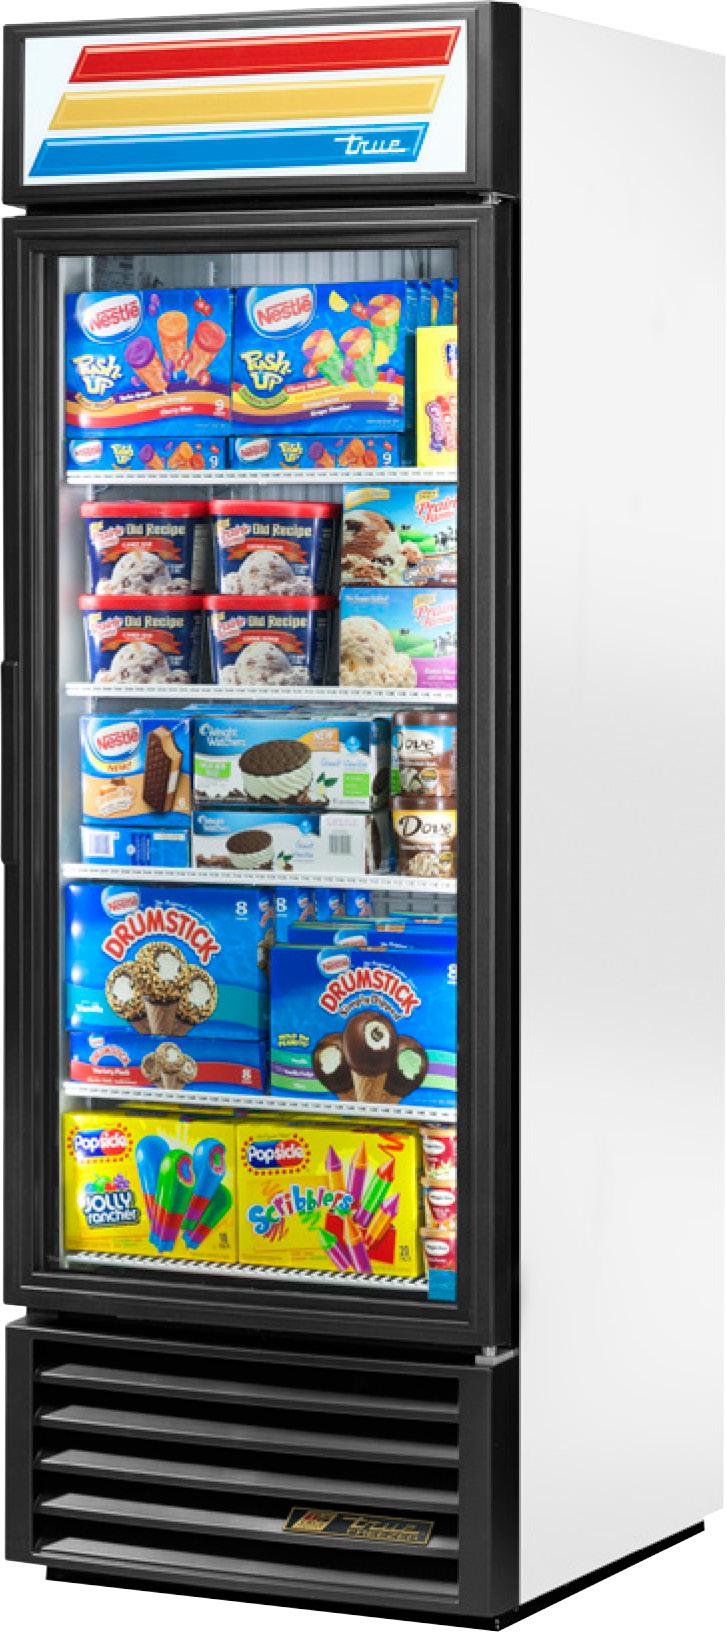 Ideal for ice cream and frozen food products. Self closing door. Positive seal, torsion type closure system. Triple pane thermal glass door assembly with extruded aluminum frame.